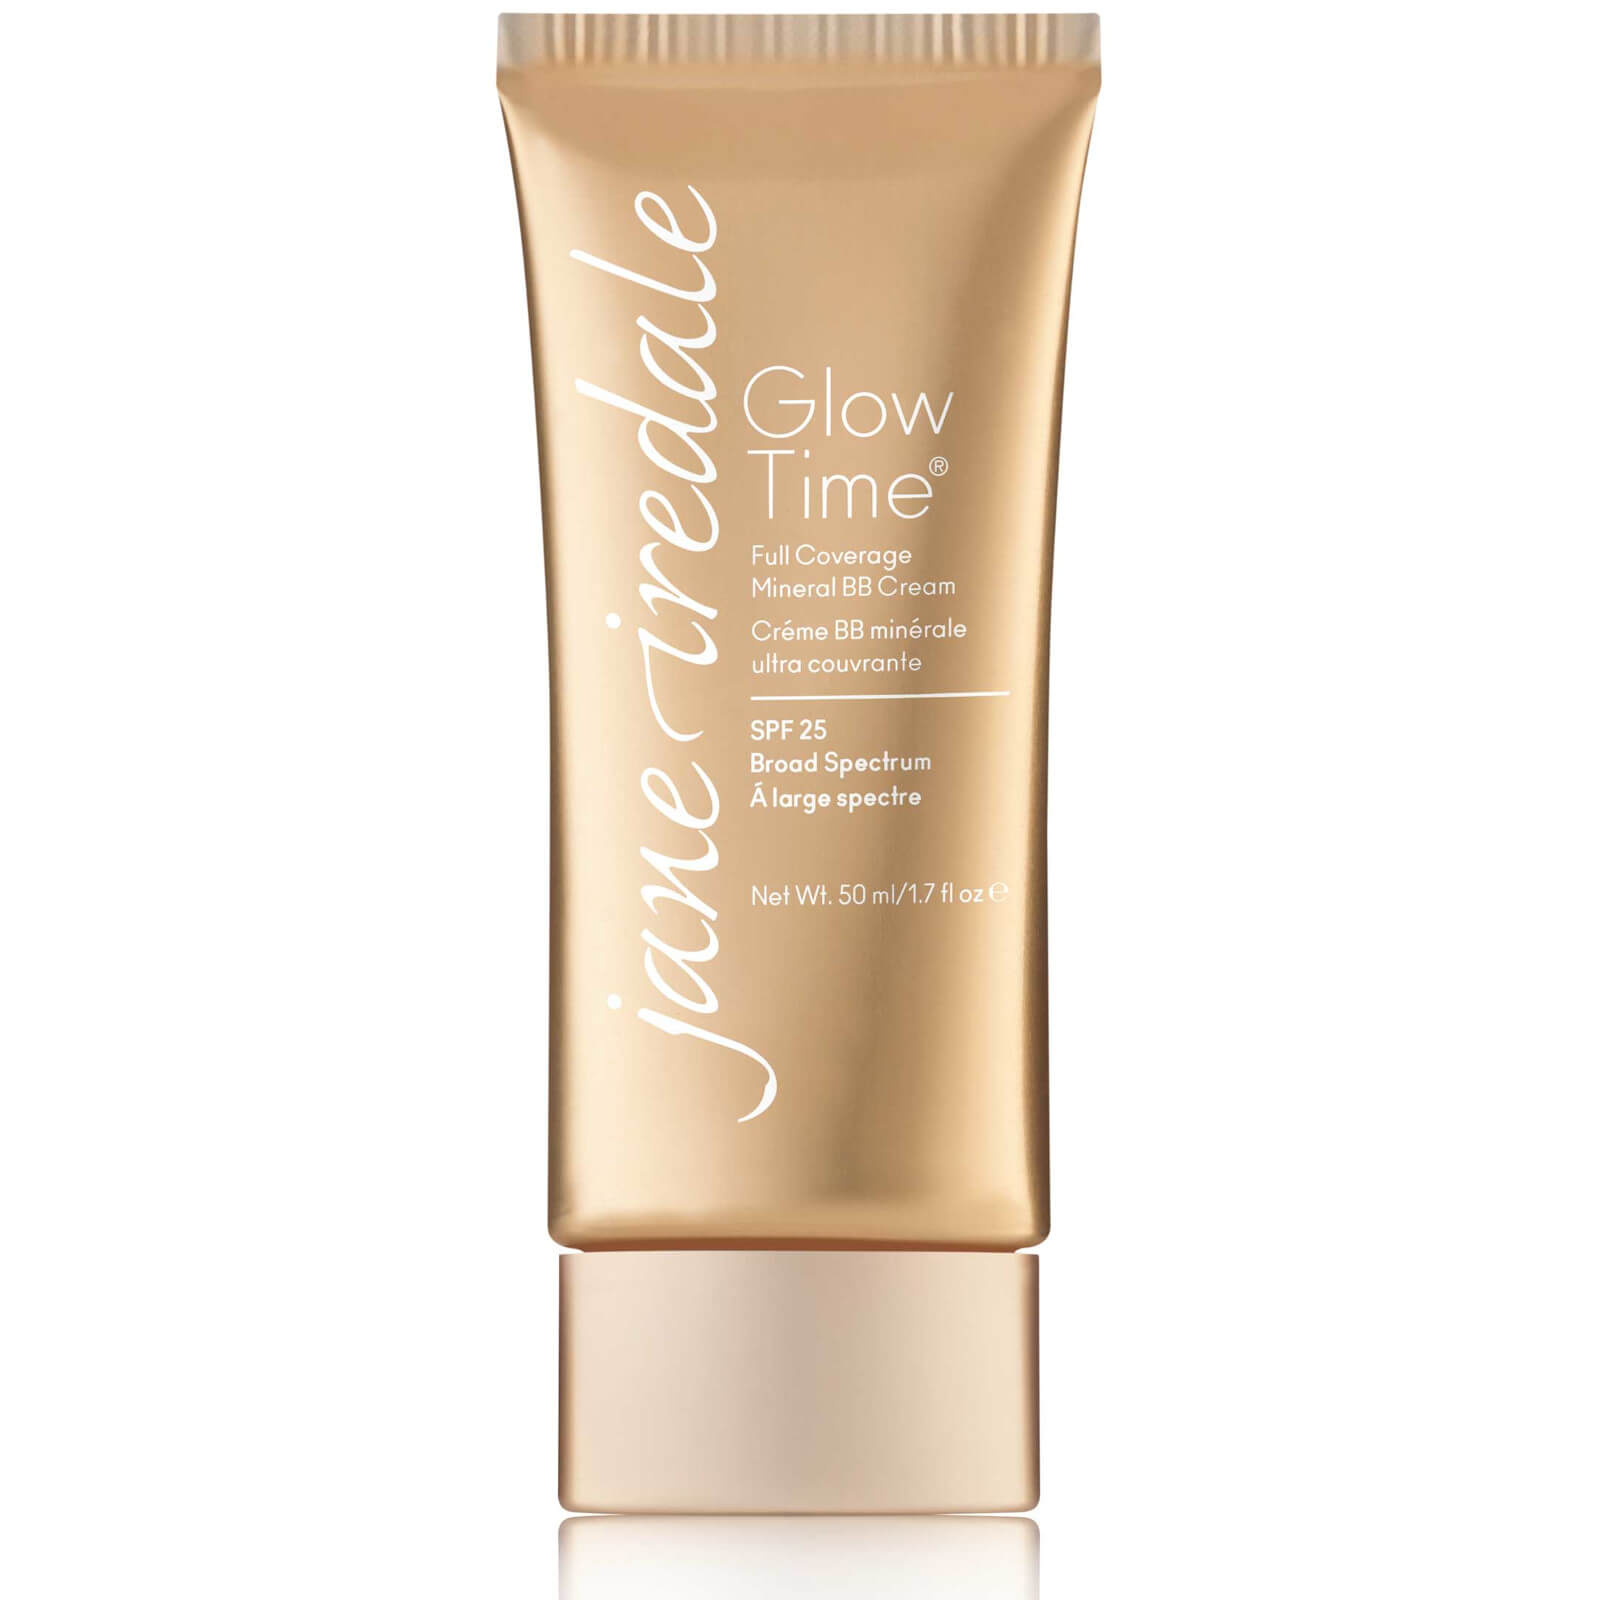 jane iredale Glow Time Full Coverage Mineral BB Cream 50ml (Various Shades) - BB5 - SPF25